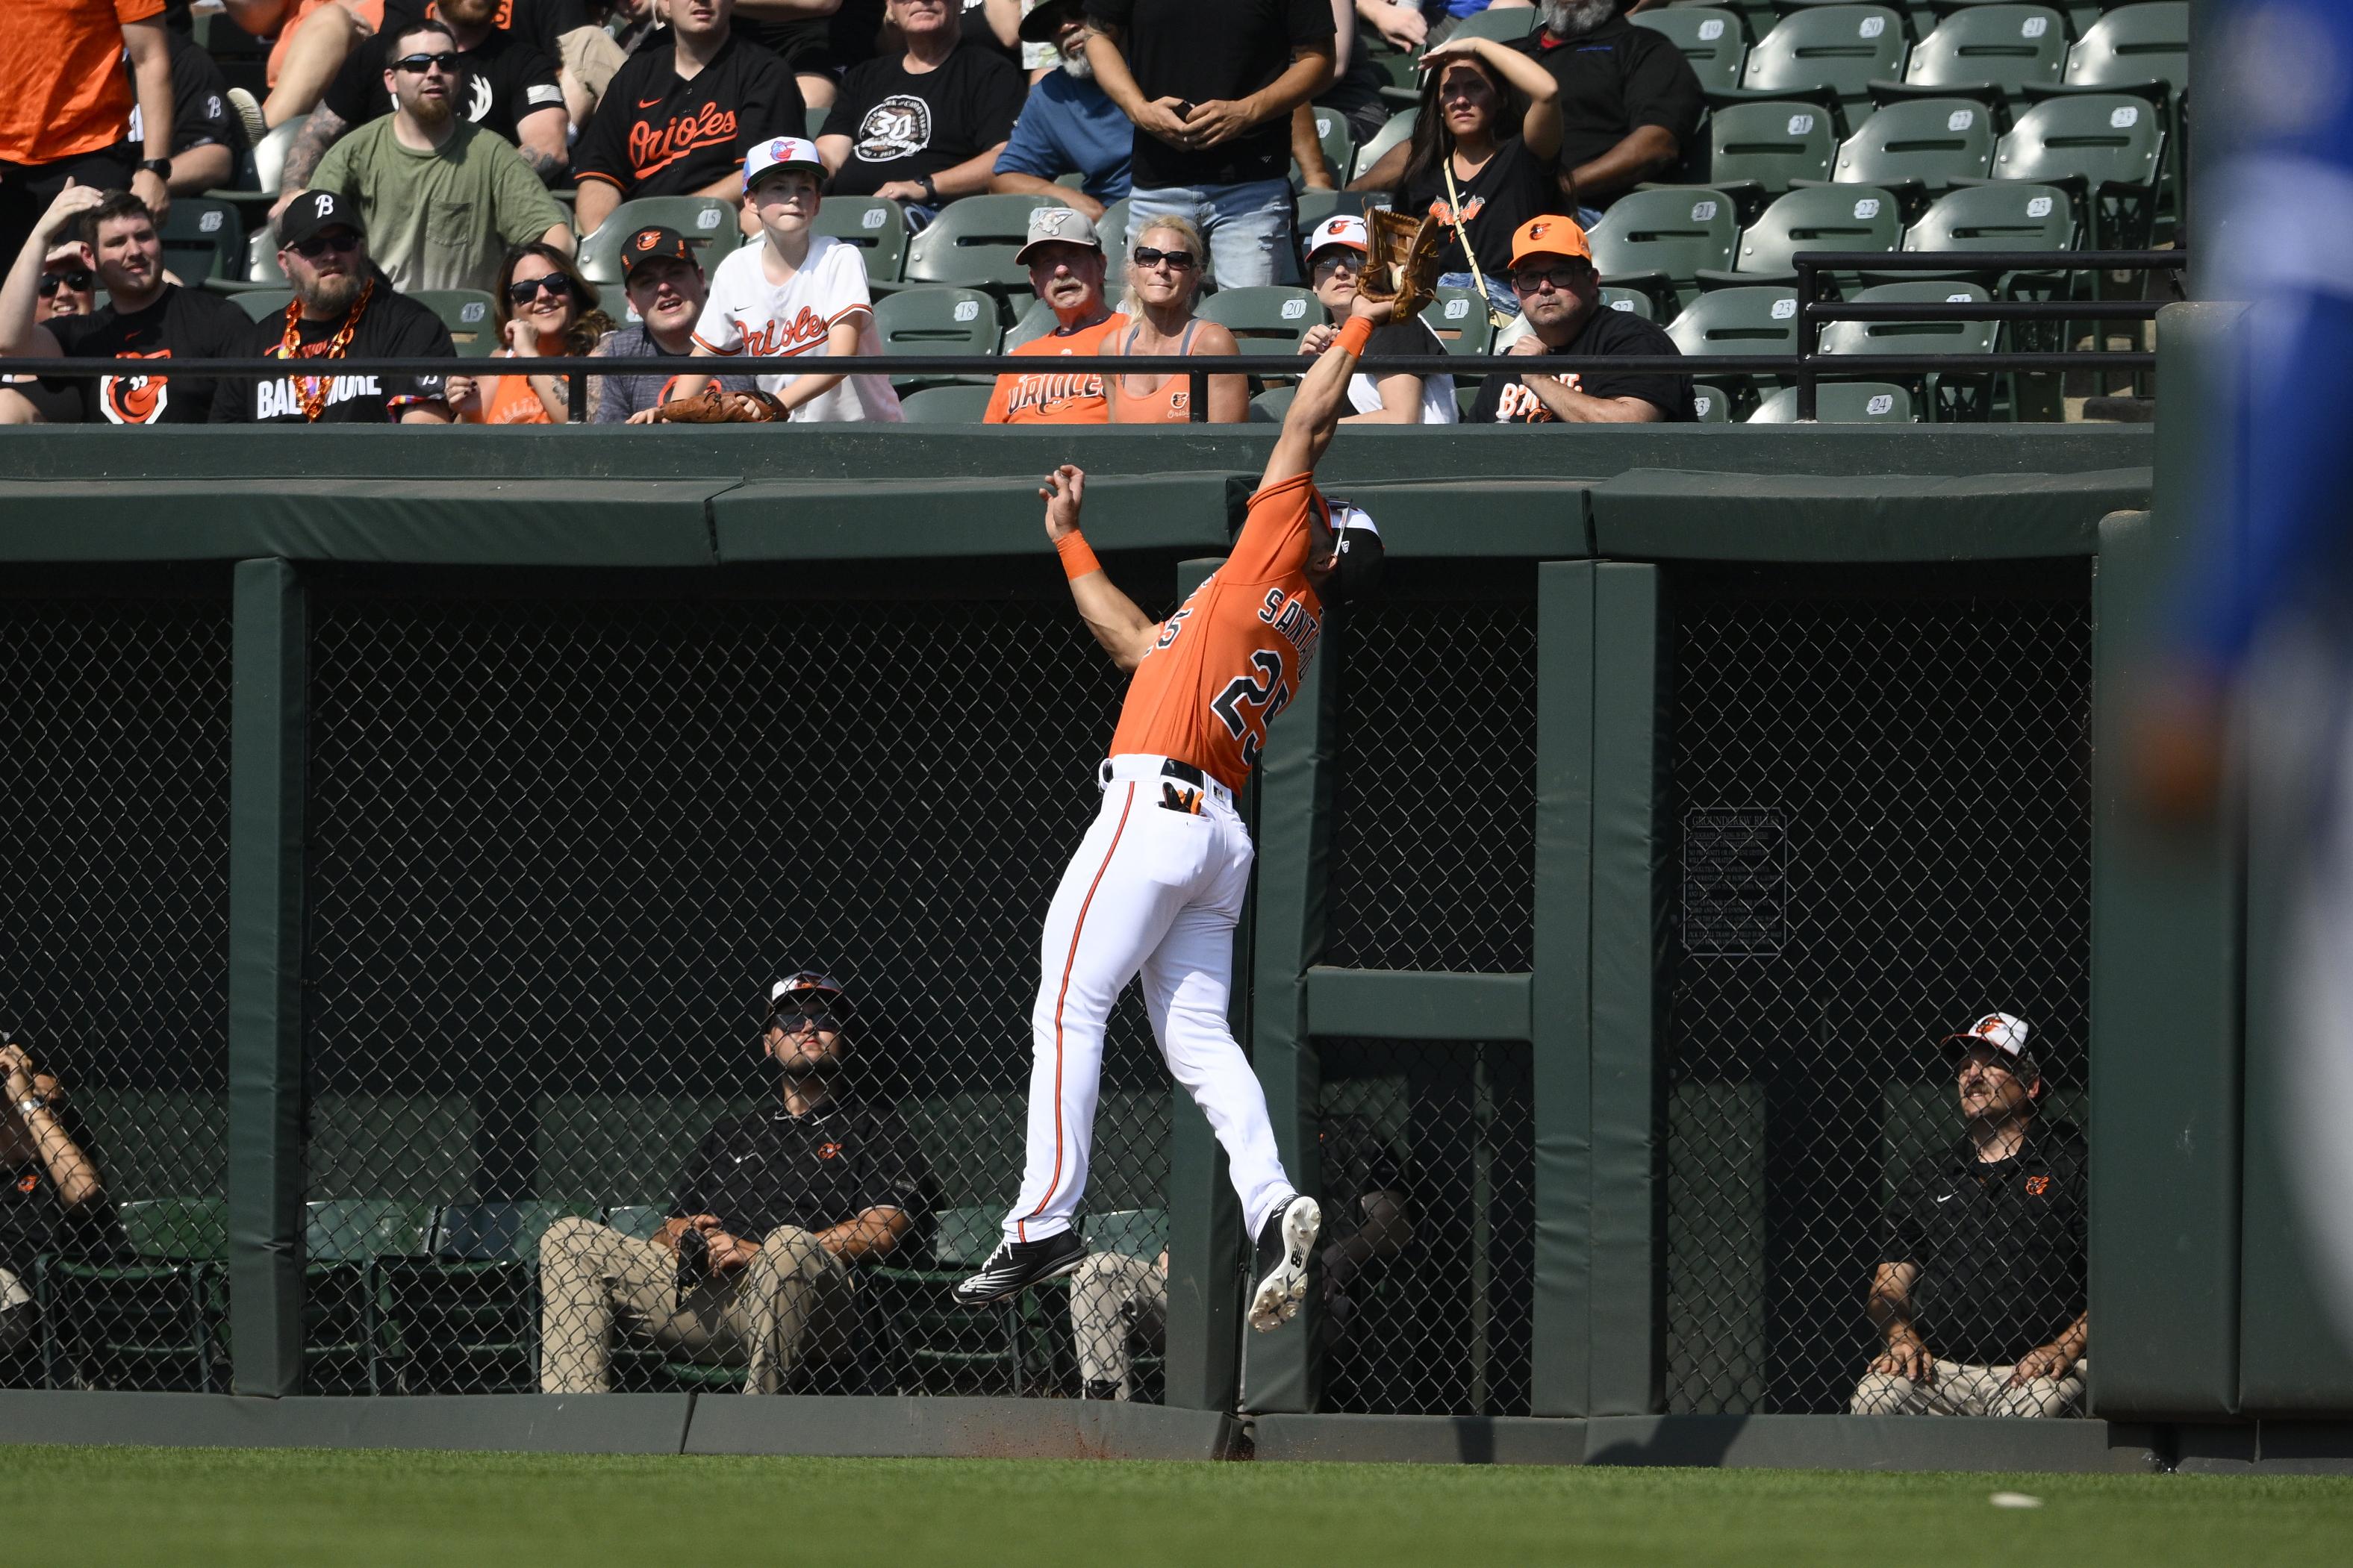 Orioles' Mullins runs perfect route to make insane diving catch vs. Royals